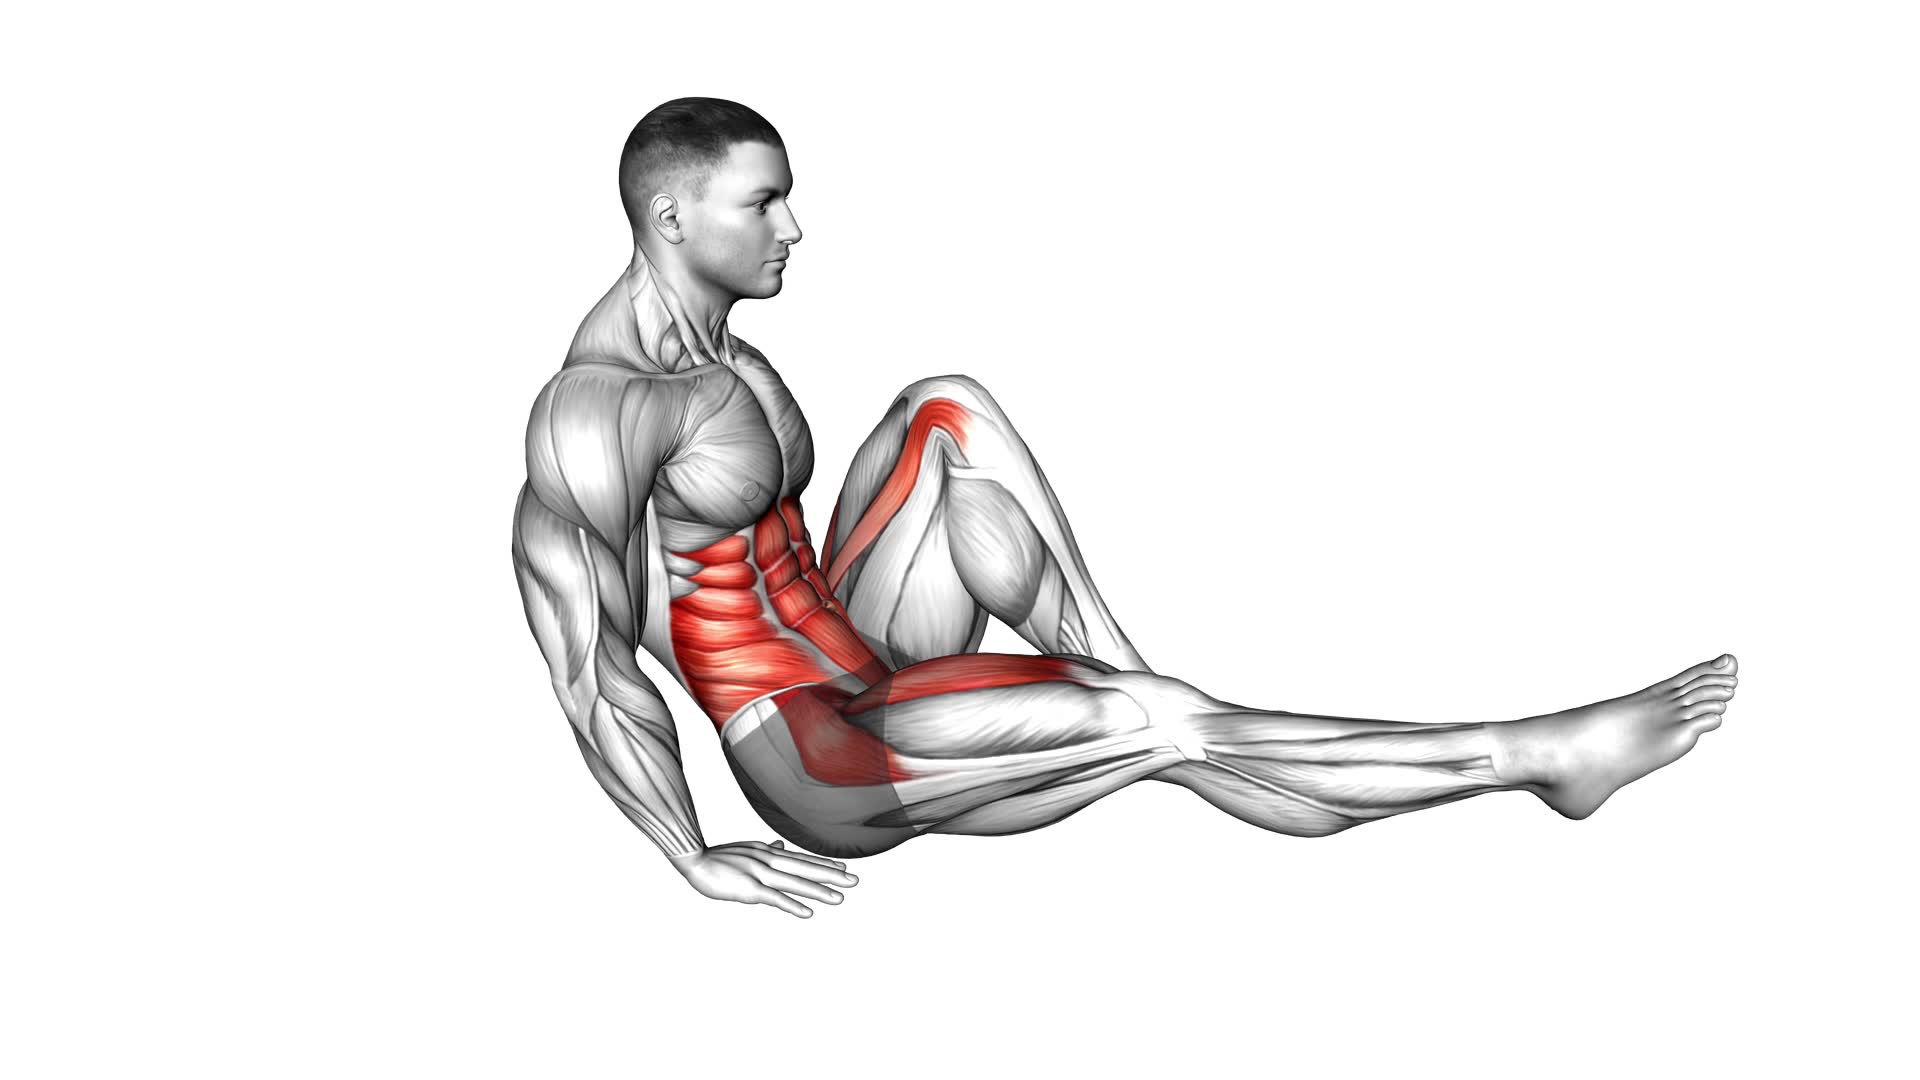 Seated Alternate In Out Leg Raise on Floor - Video Exercise Guide & Tips